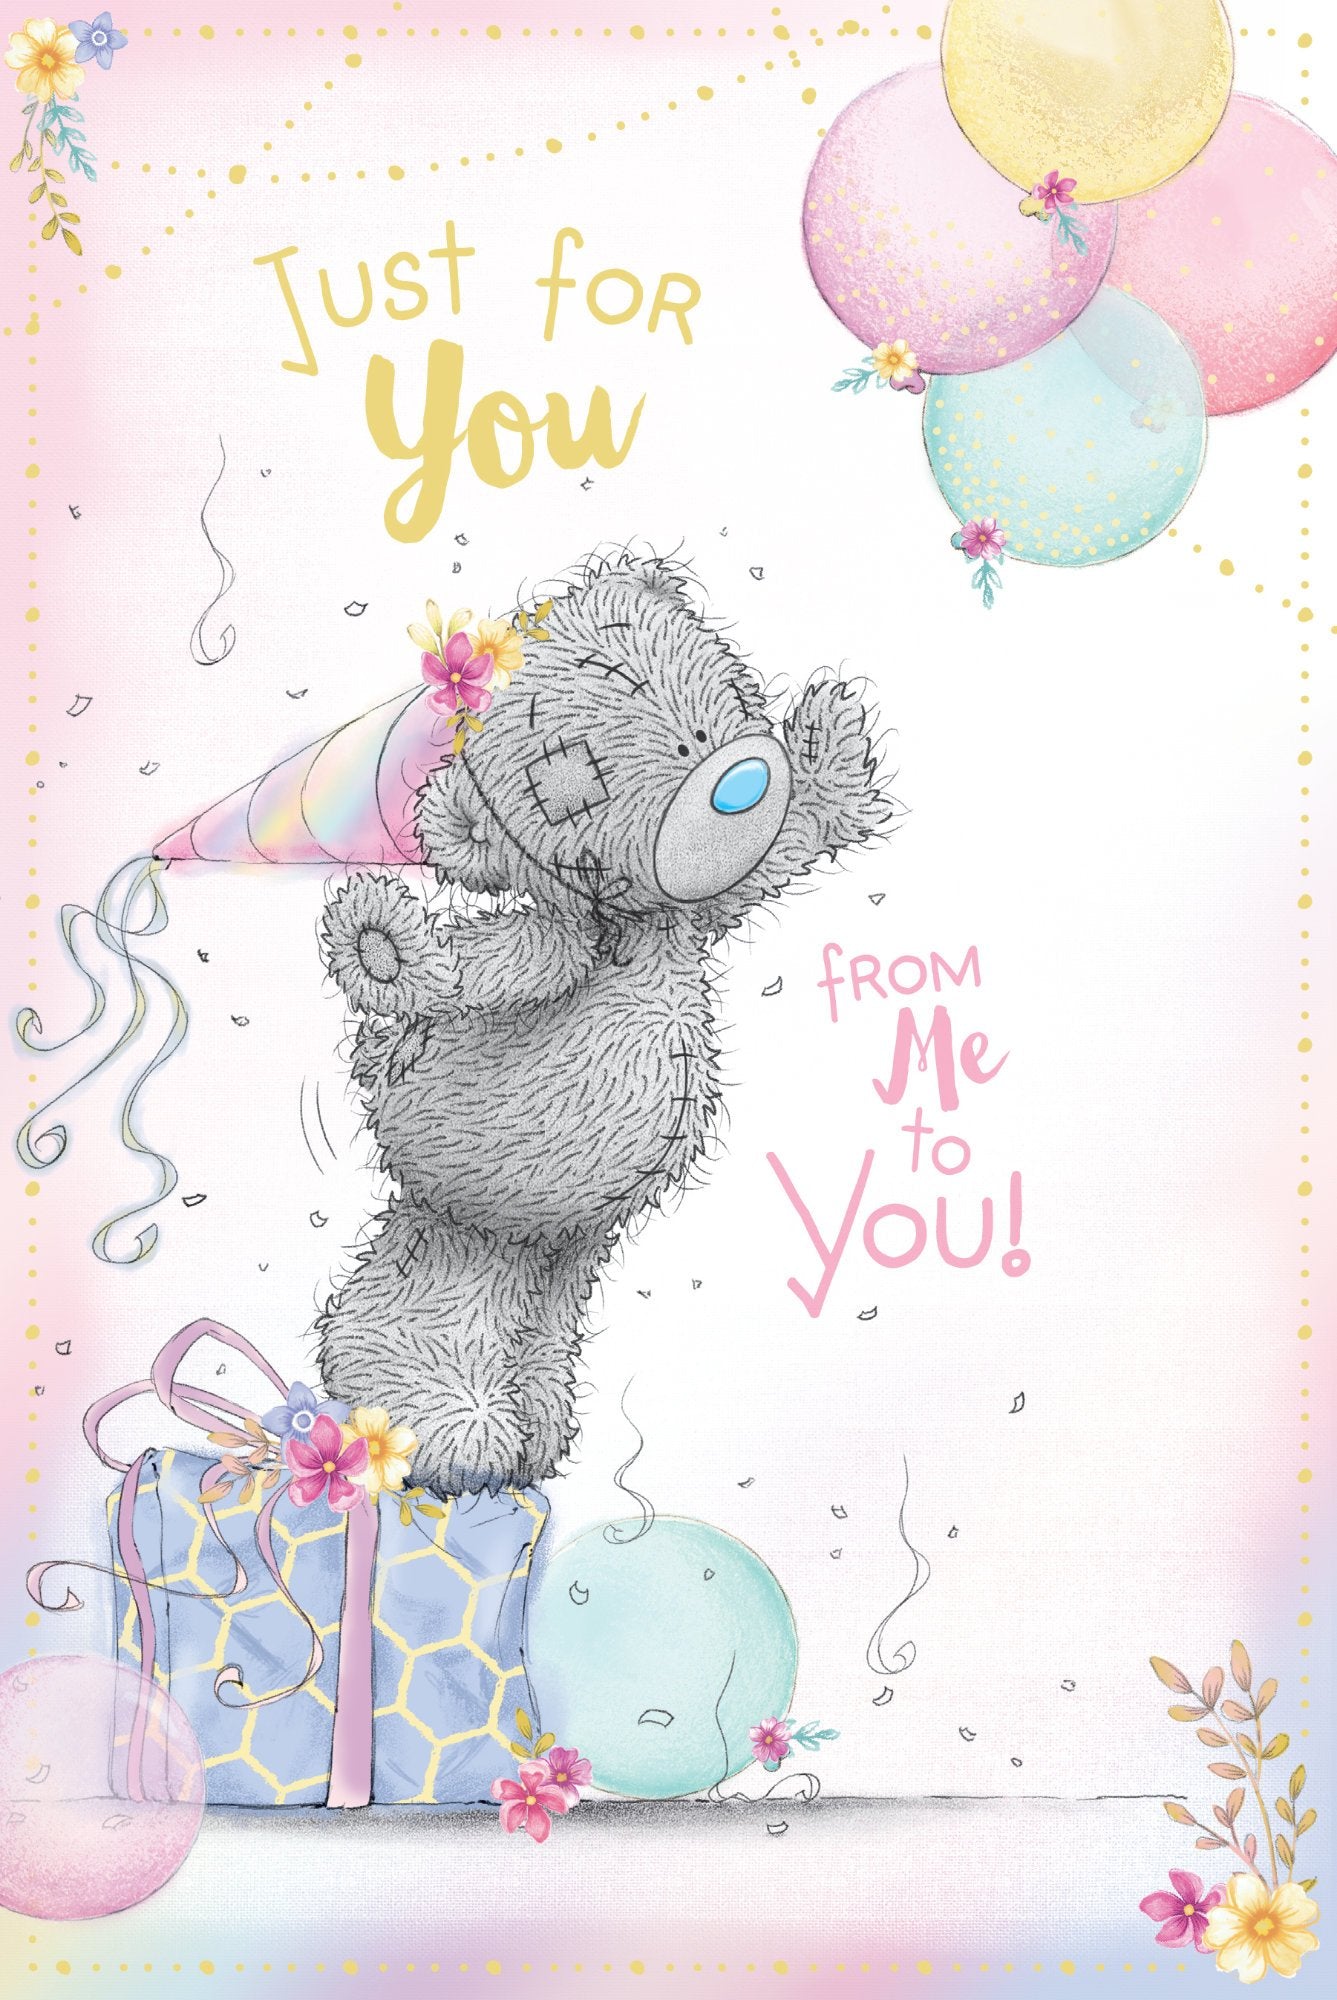 Photograph of Open Birthday Bear Stood on Gift Greetings Card at Nicole's Shop